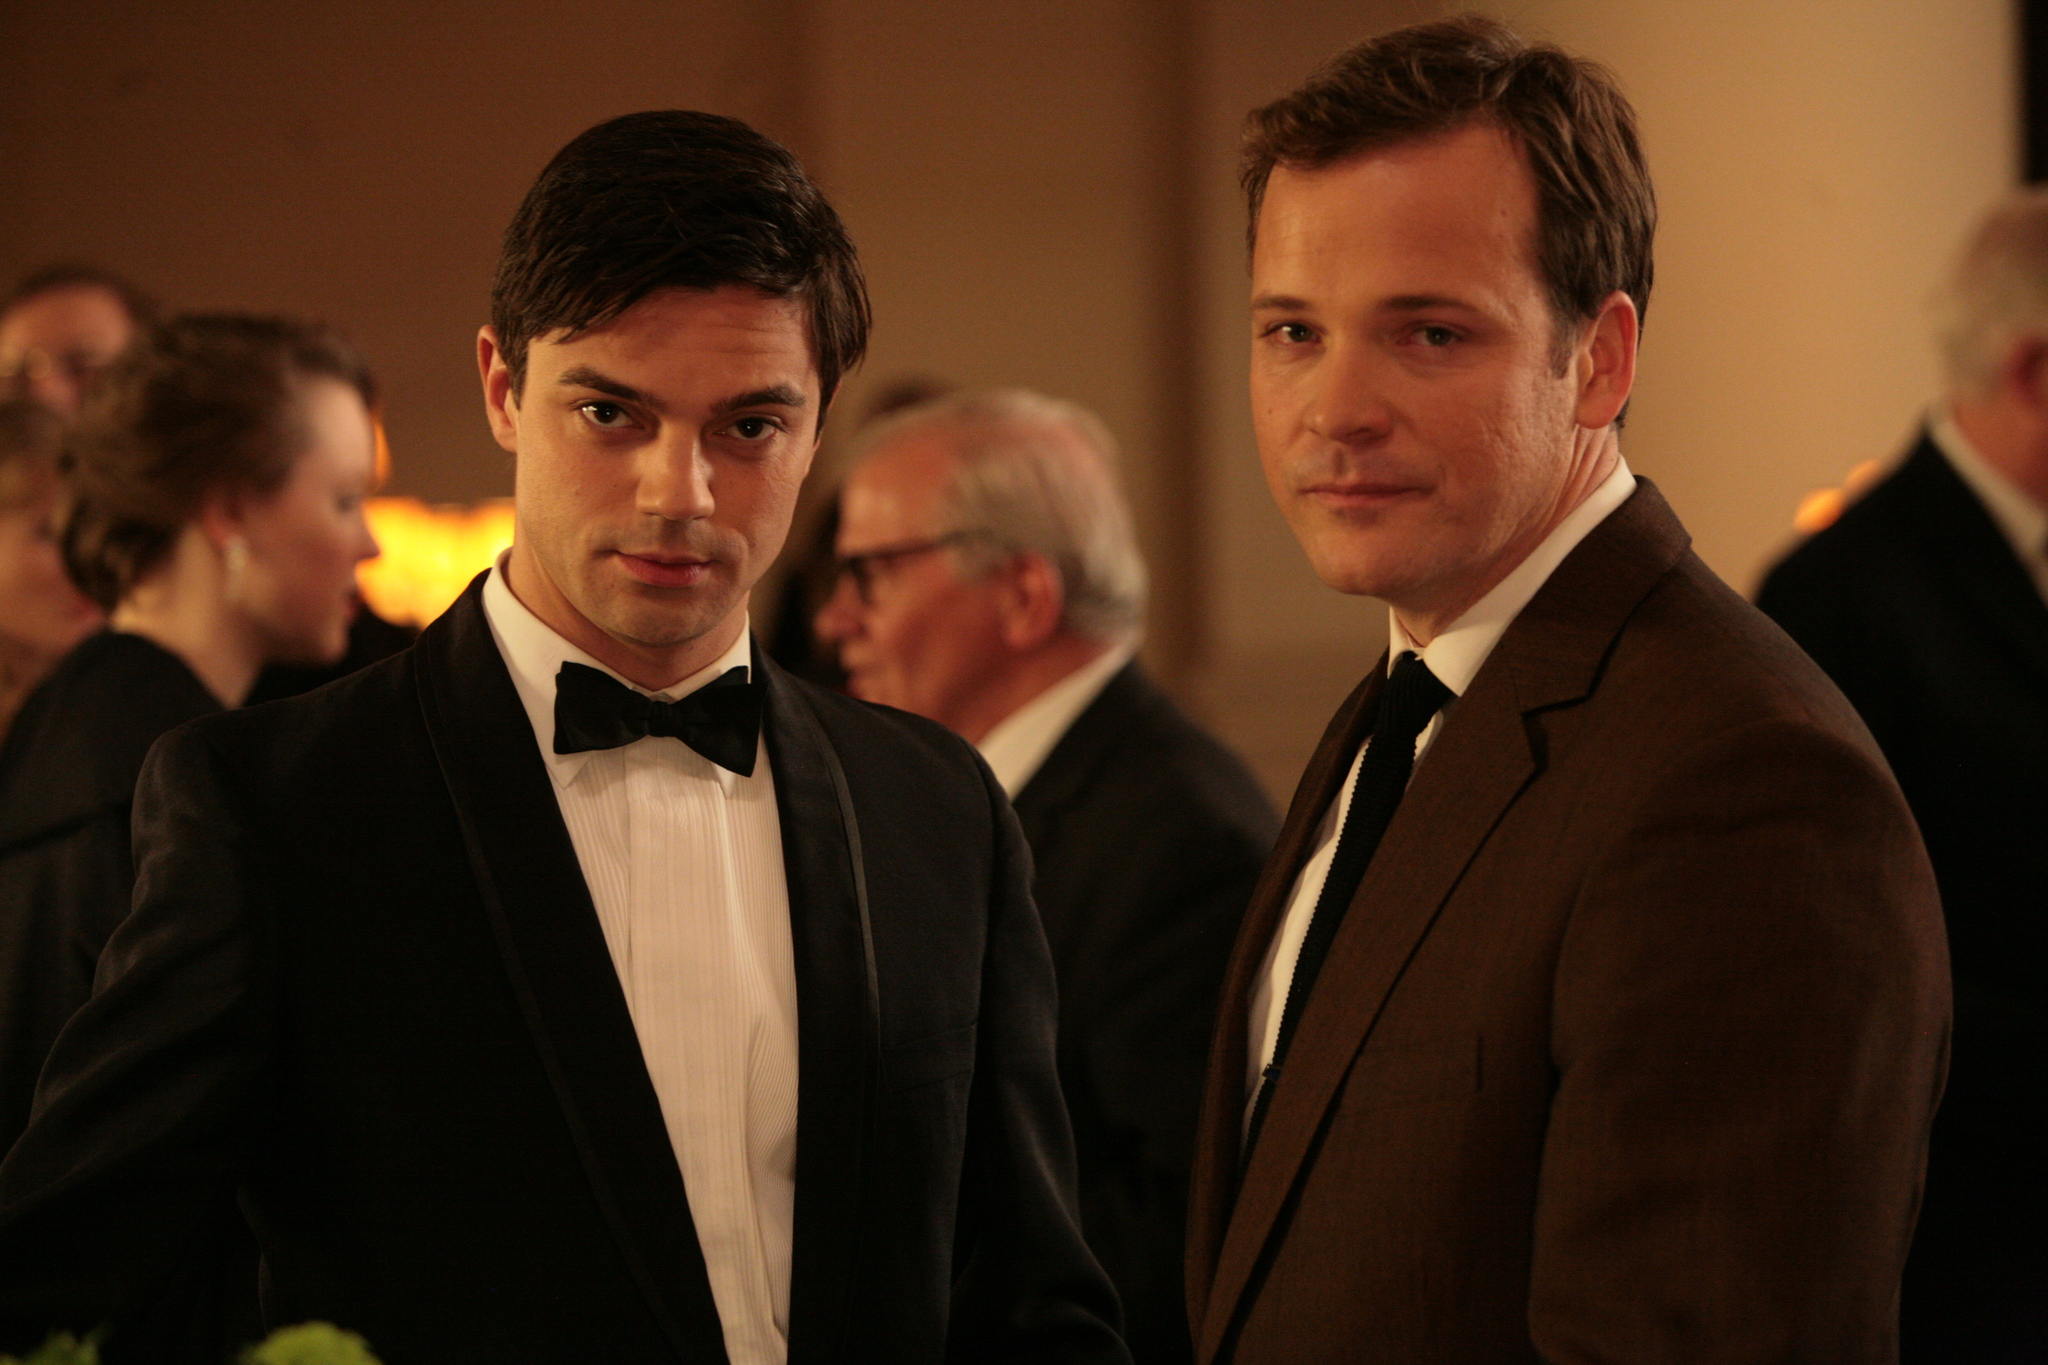 Still of Peter Sarsgaard and Dominic Cooper in An Education (2009)